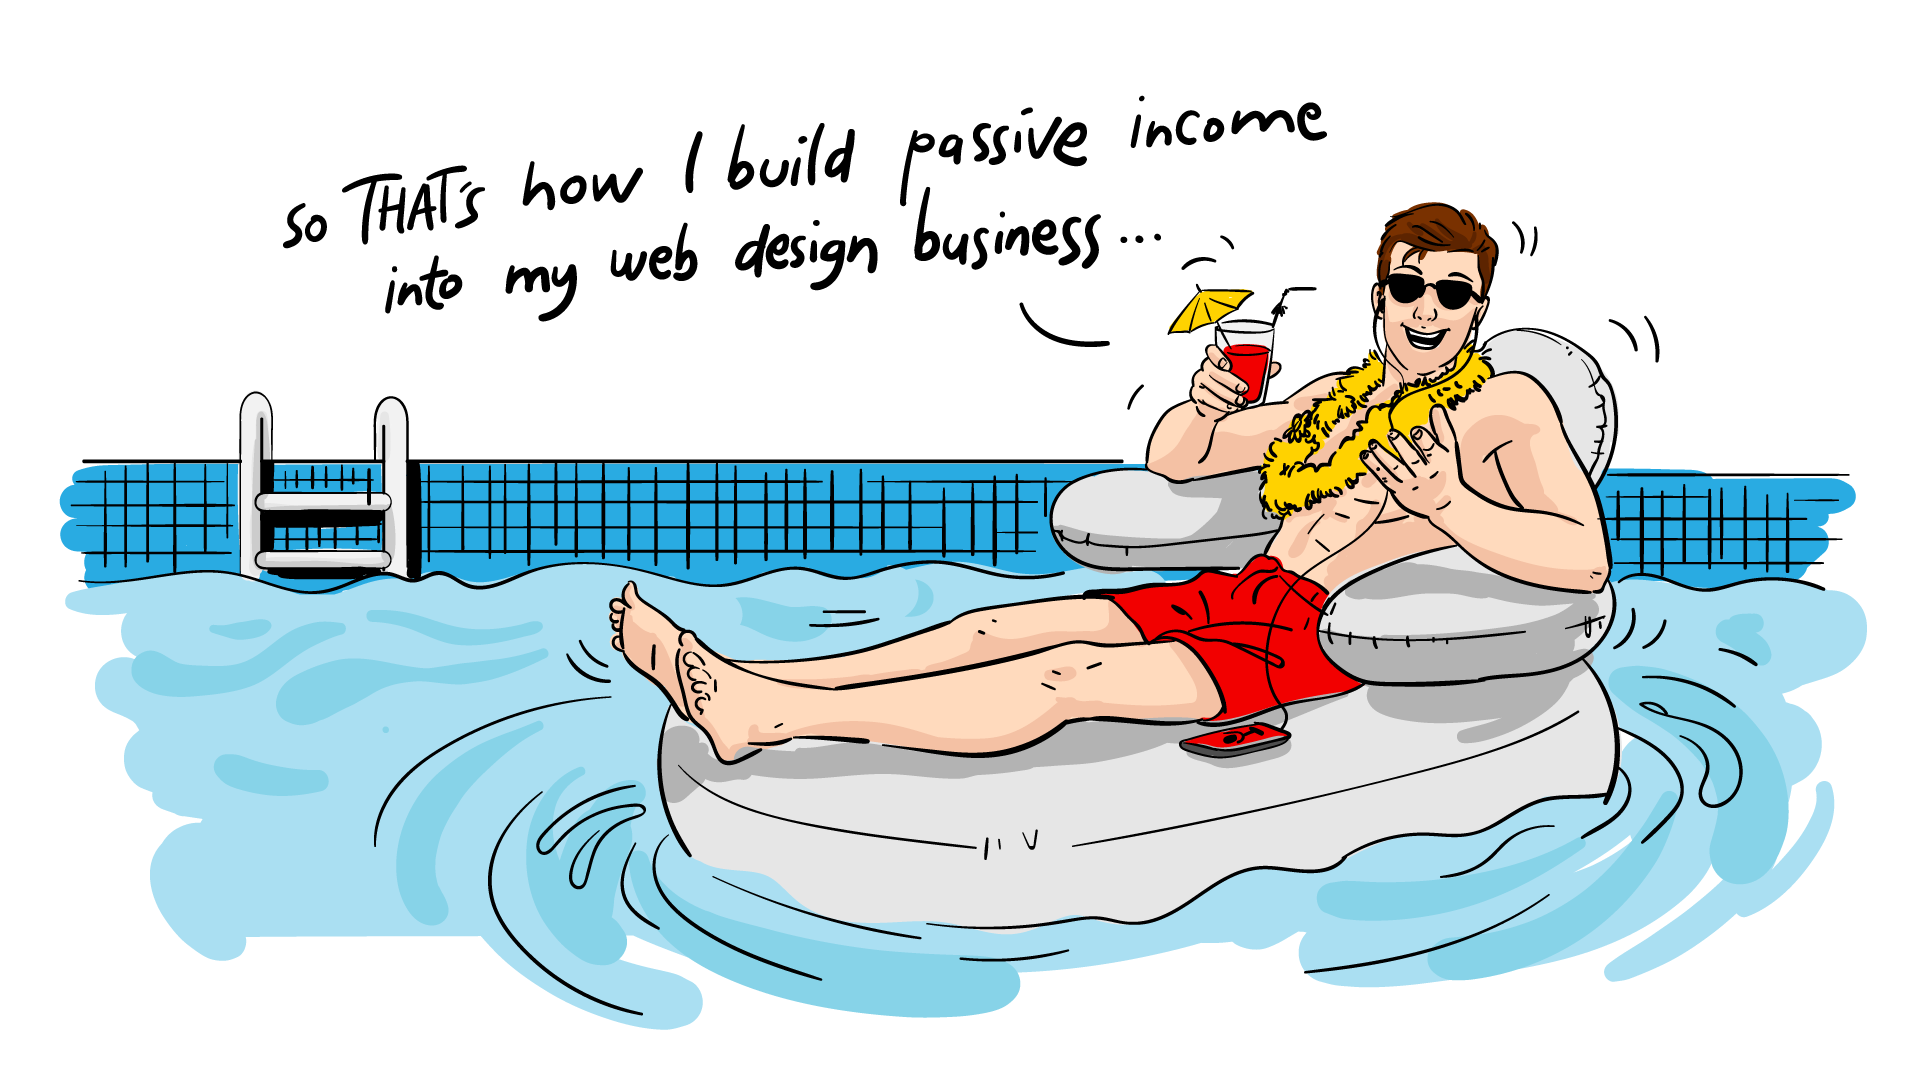 A man lounging in a pool listening to web design podcasts.